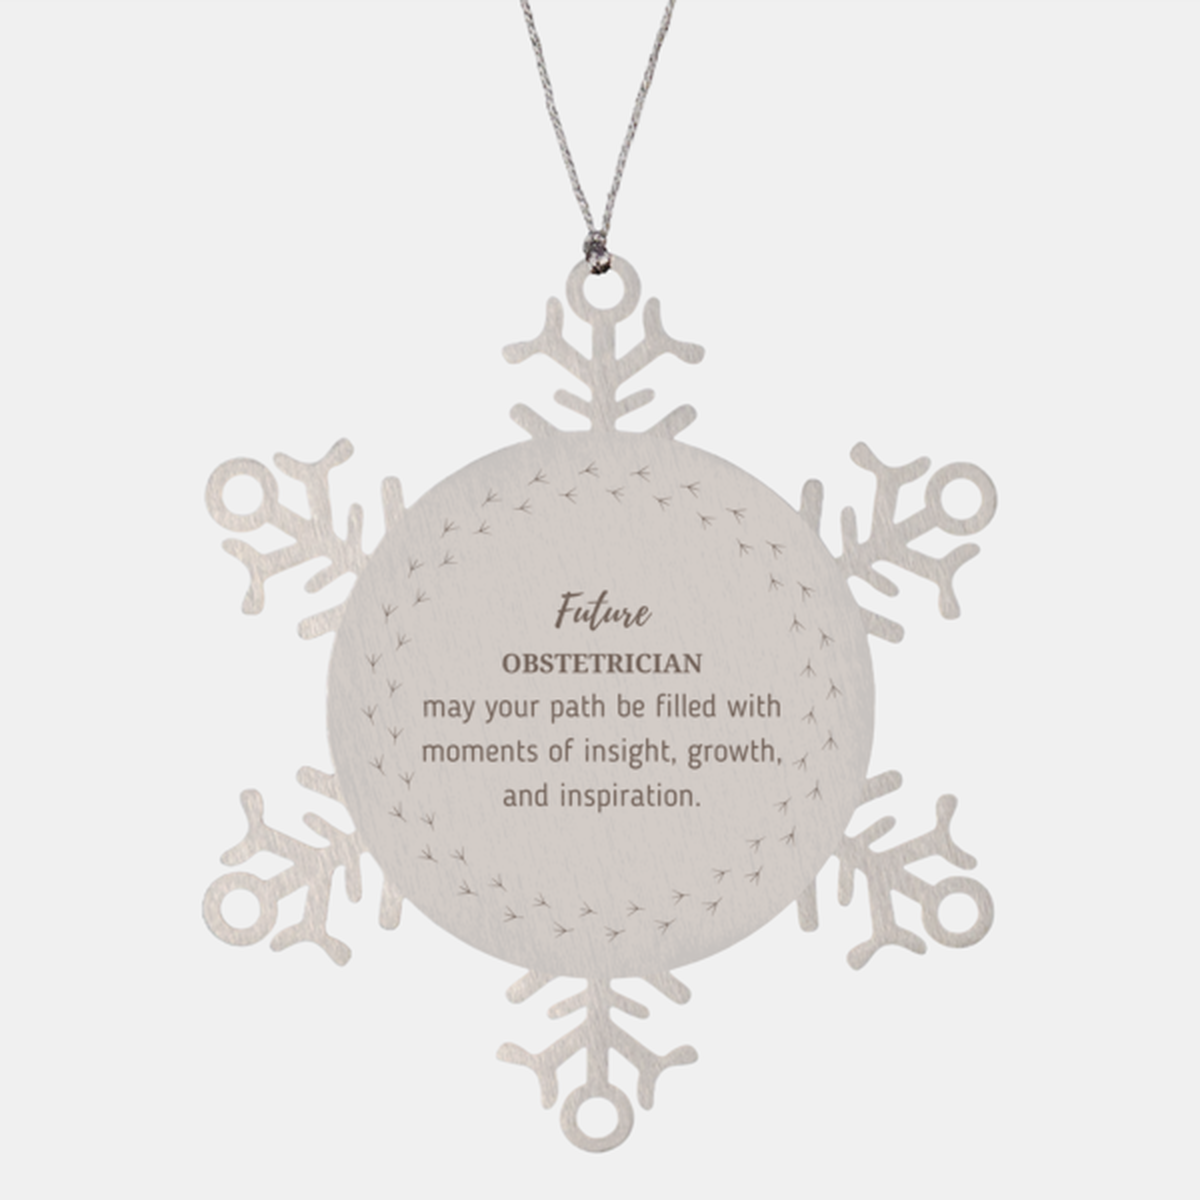 Future Obstetrician Gifts, May your path be filled with moments of insight, Graduation Gifts for New Obstetrician, Christmas Unique Snowflake Ornament For Men, Women, Friends